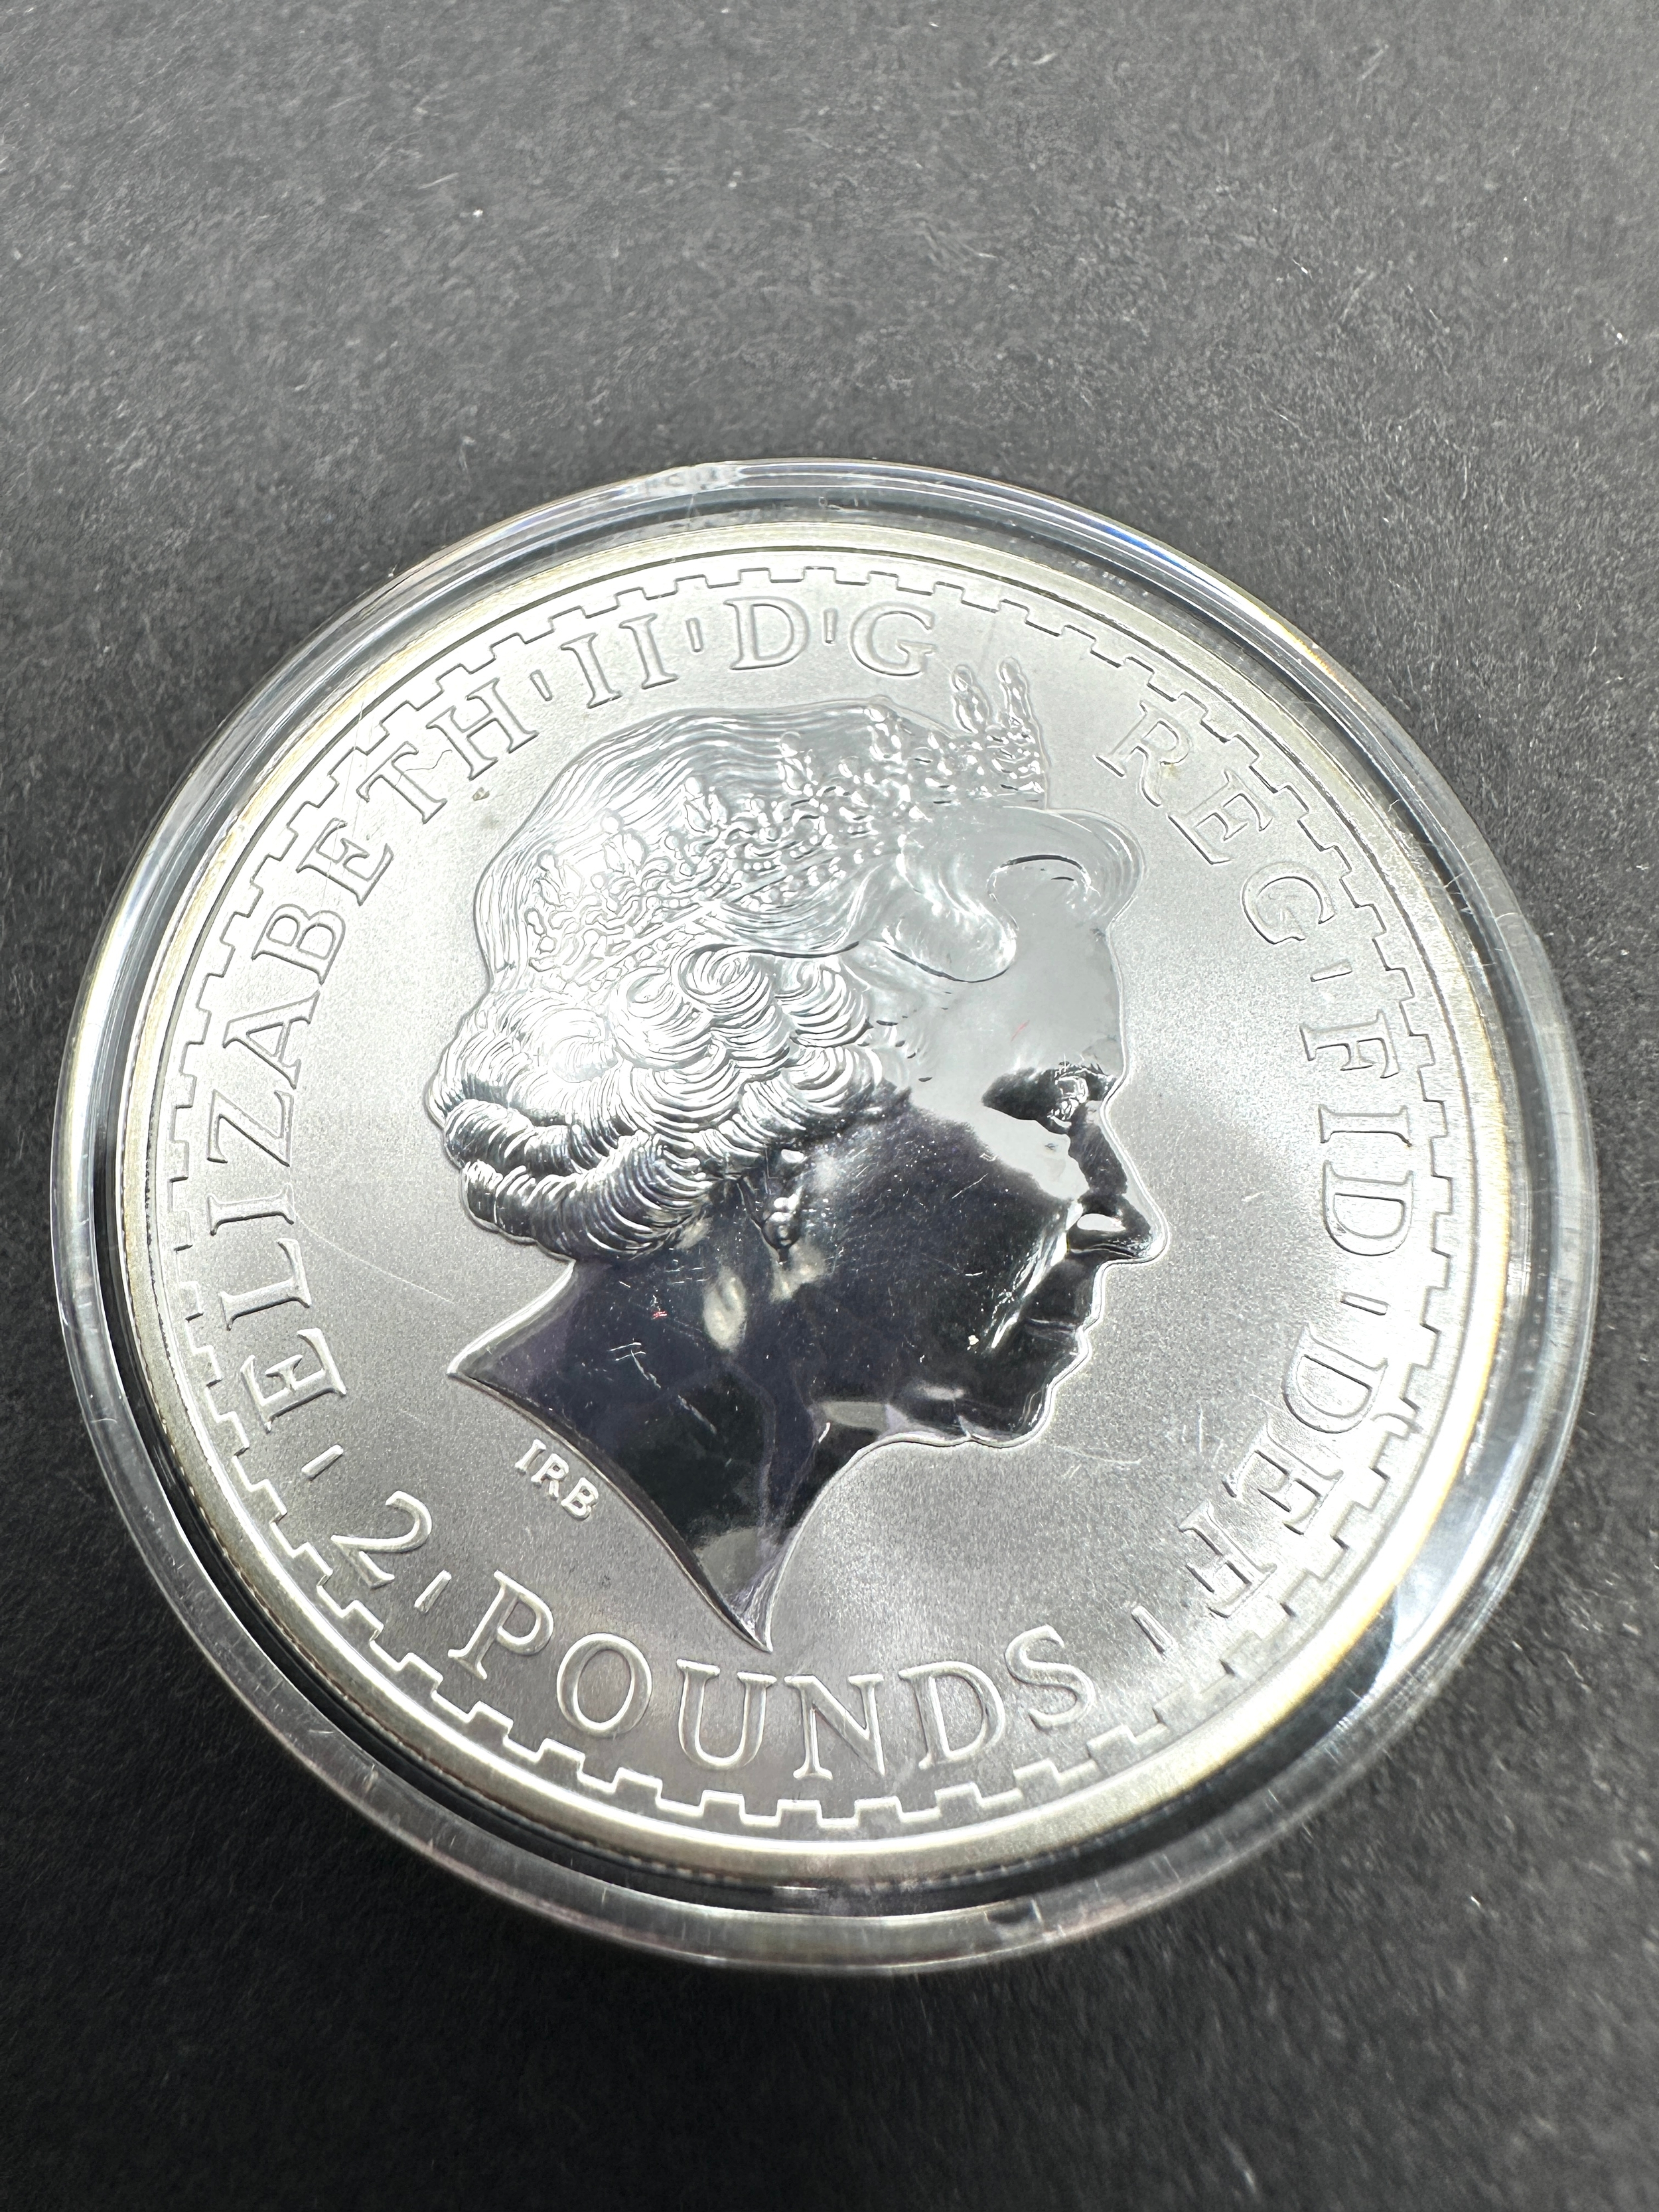 1999 Royal Mint Silver Proof Britannia £2 Two Pounds 1oz Coin Encapsulated - Image 2 of 2